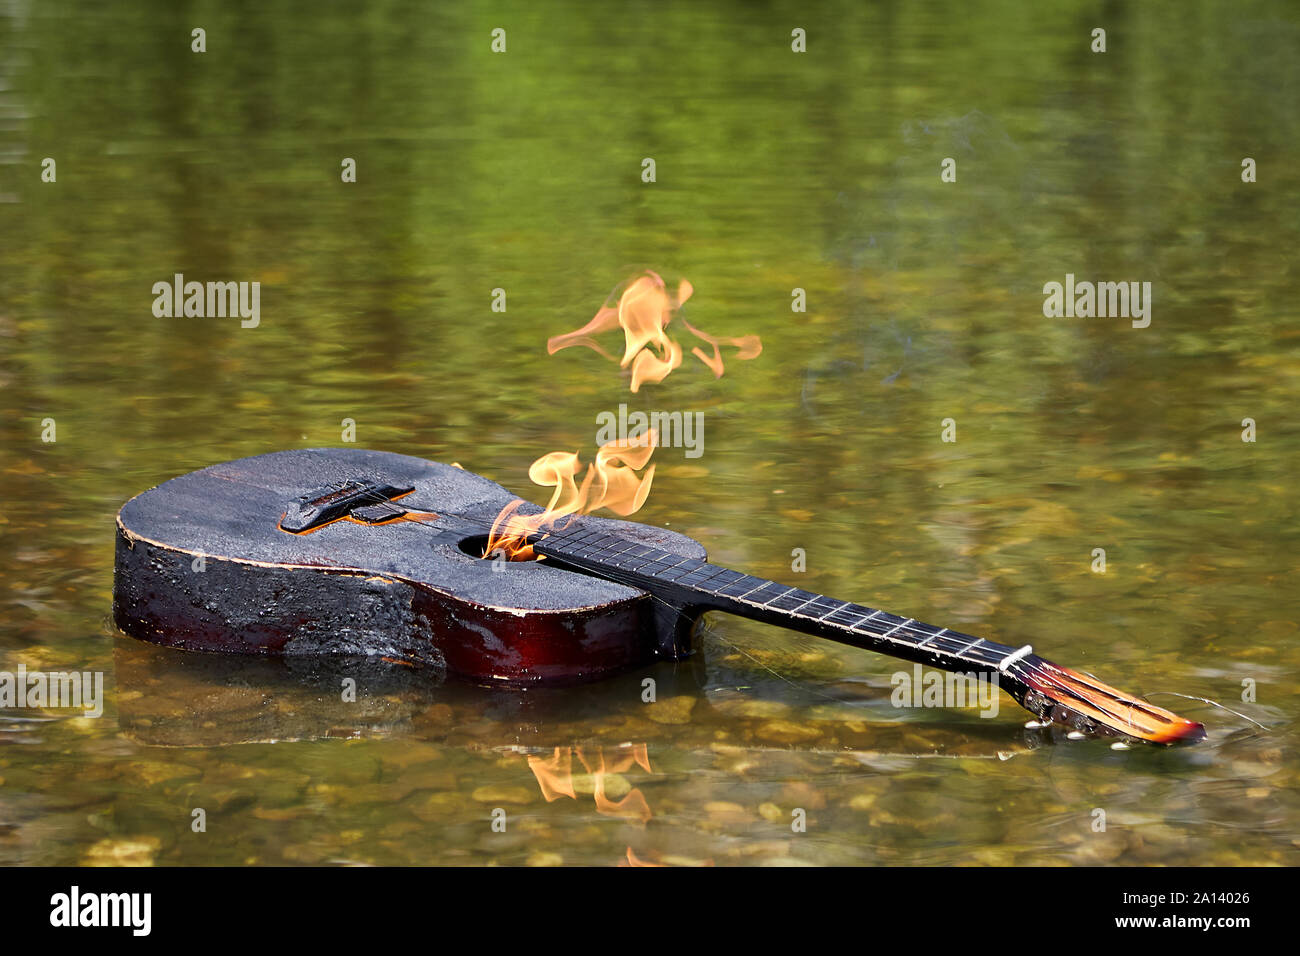 A burnt acoustic guitar with flames on its surface floats along the river. The musician set fire to the guitar and threw it into the river. A burning Stock Photo